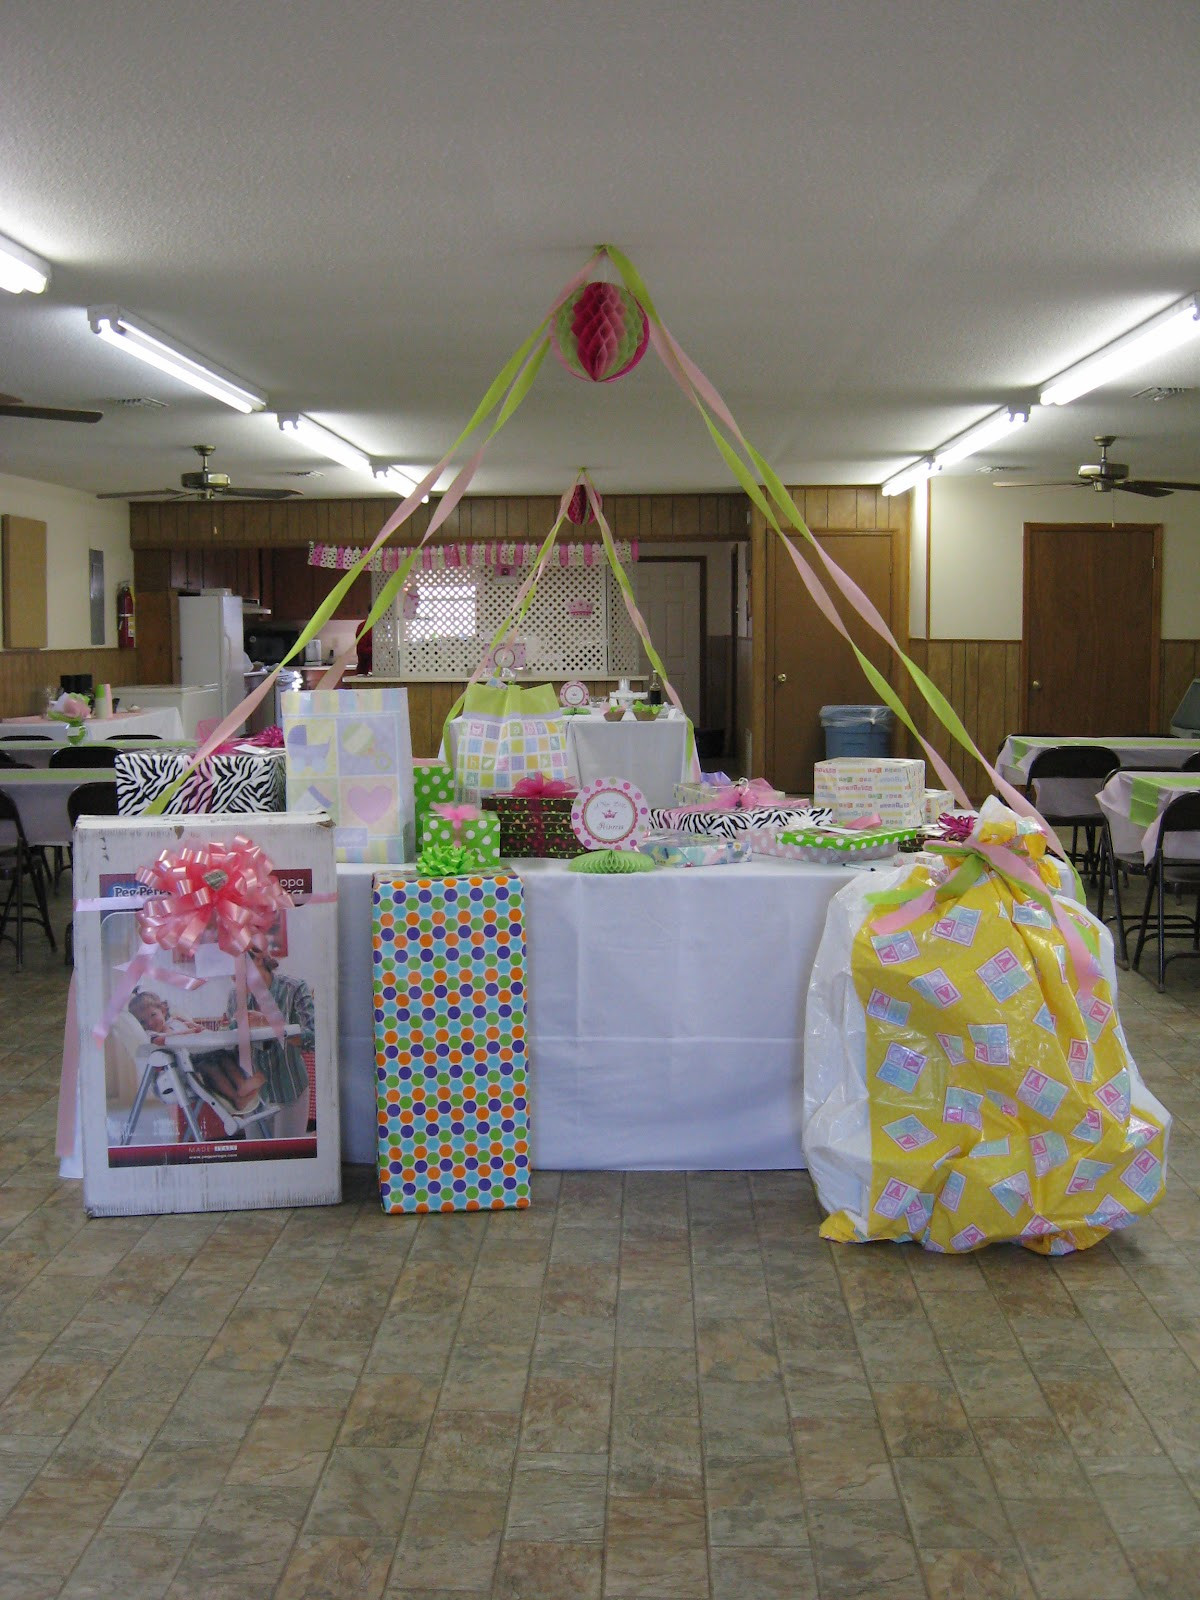 Decorating Ideas For Baby Shower Gift Table
 A Home in the Country Baby Shower